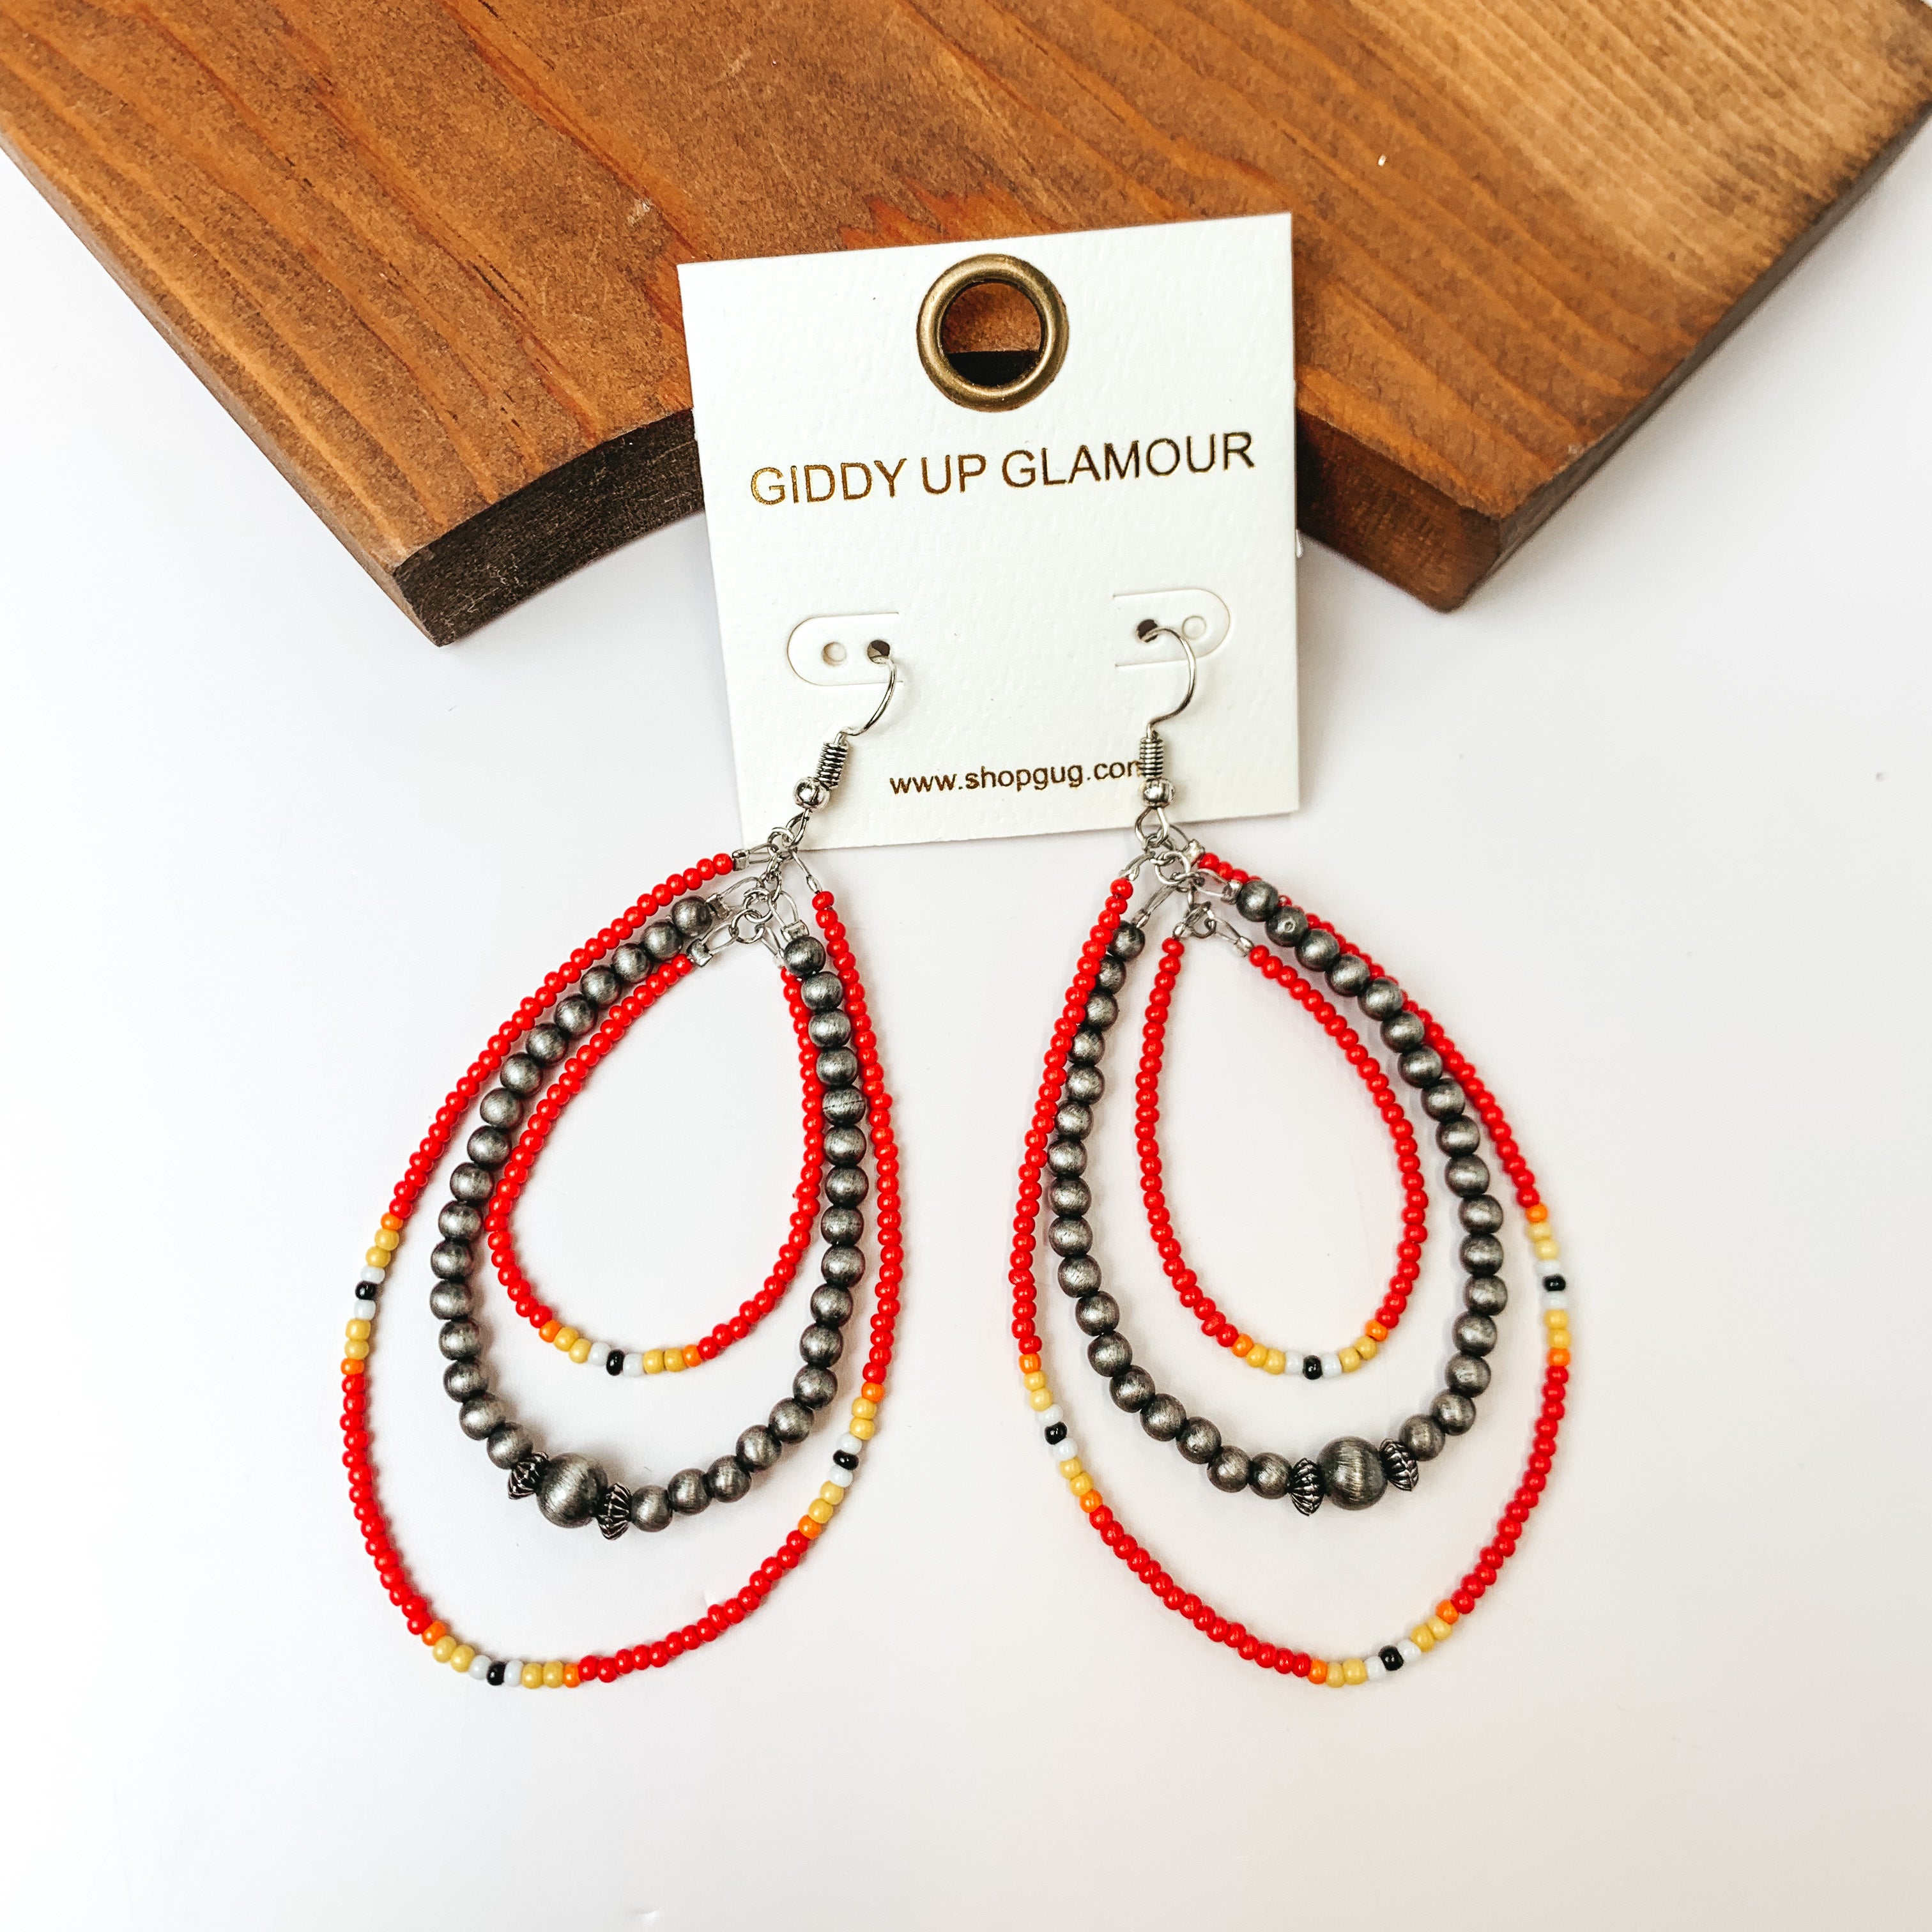 Western Style Triple Open Teardrop Earrings In Silver Tone and Red. Pictured on a white background with a wood piece behind the earrings.